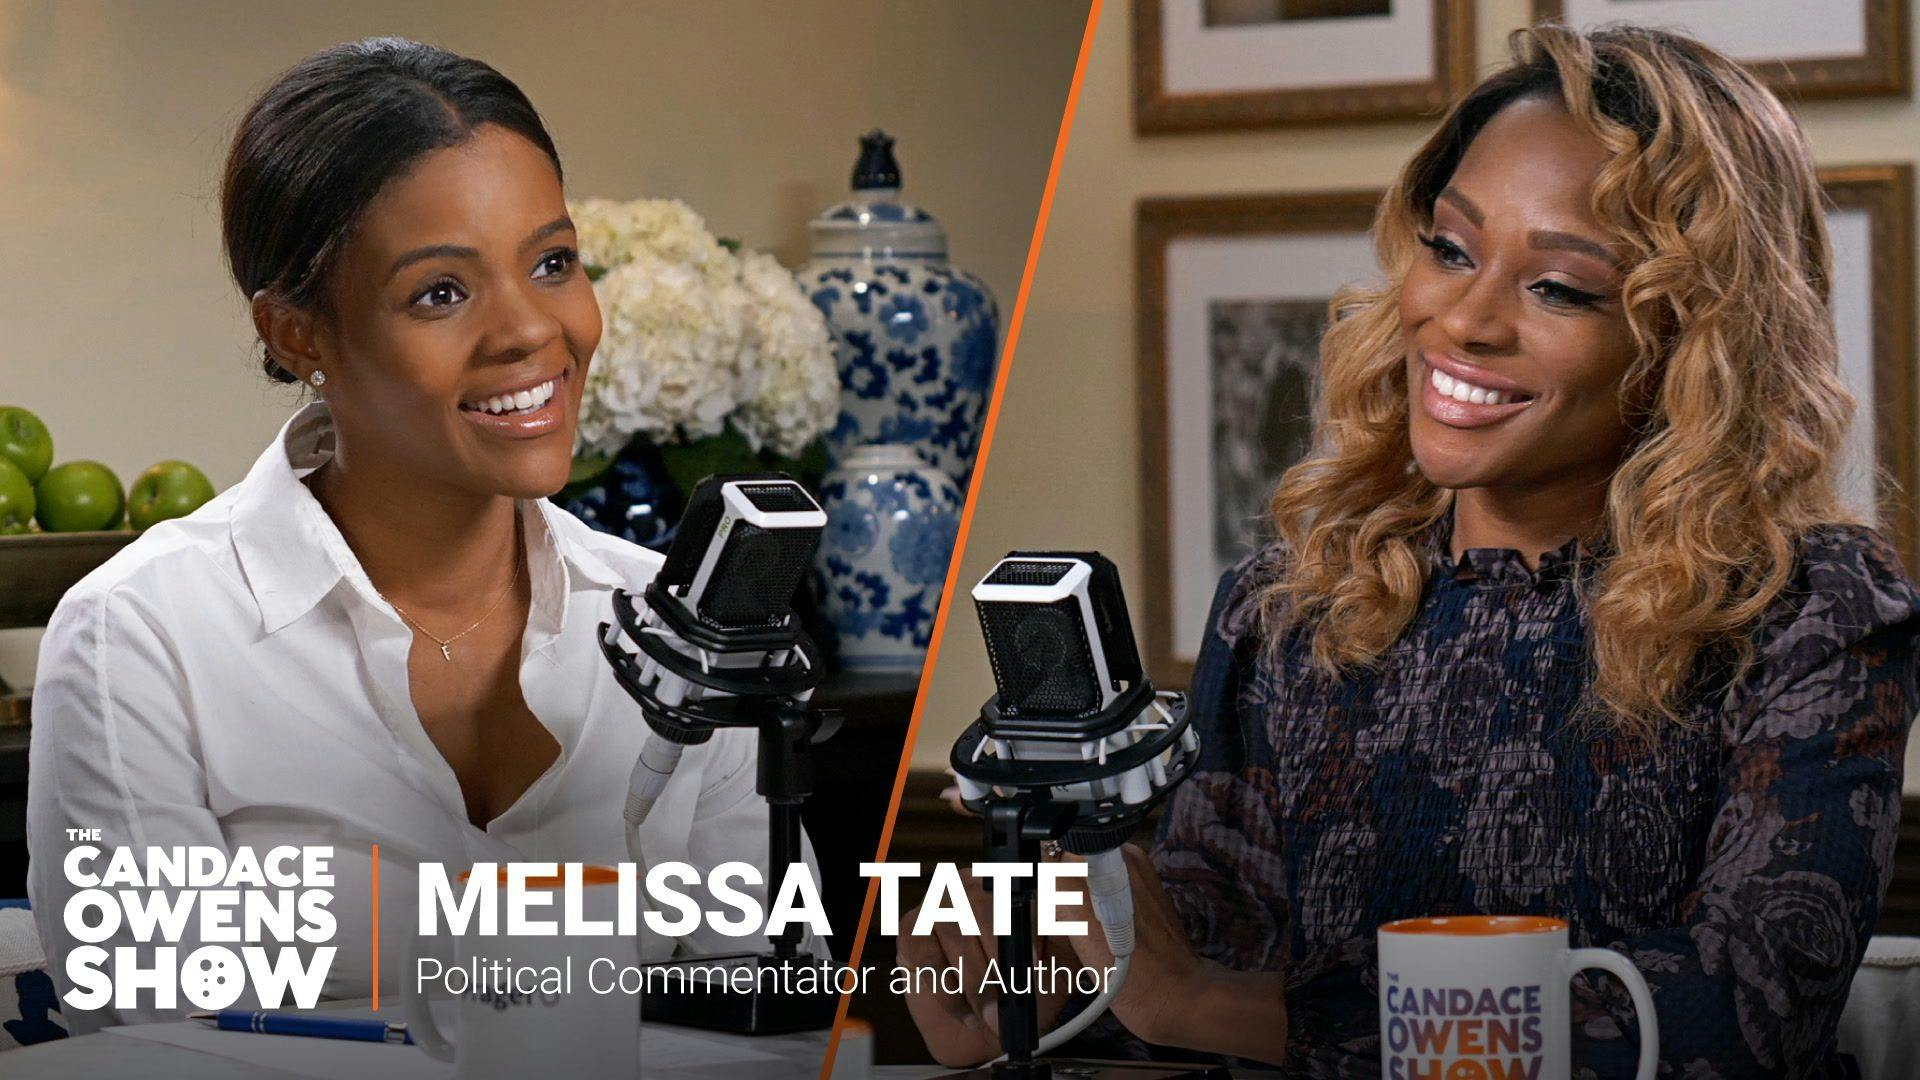 The Candace Owens Show: Melissa Tate